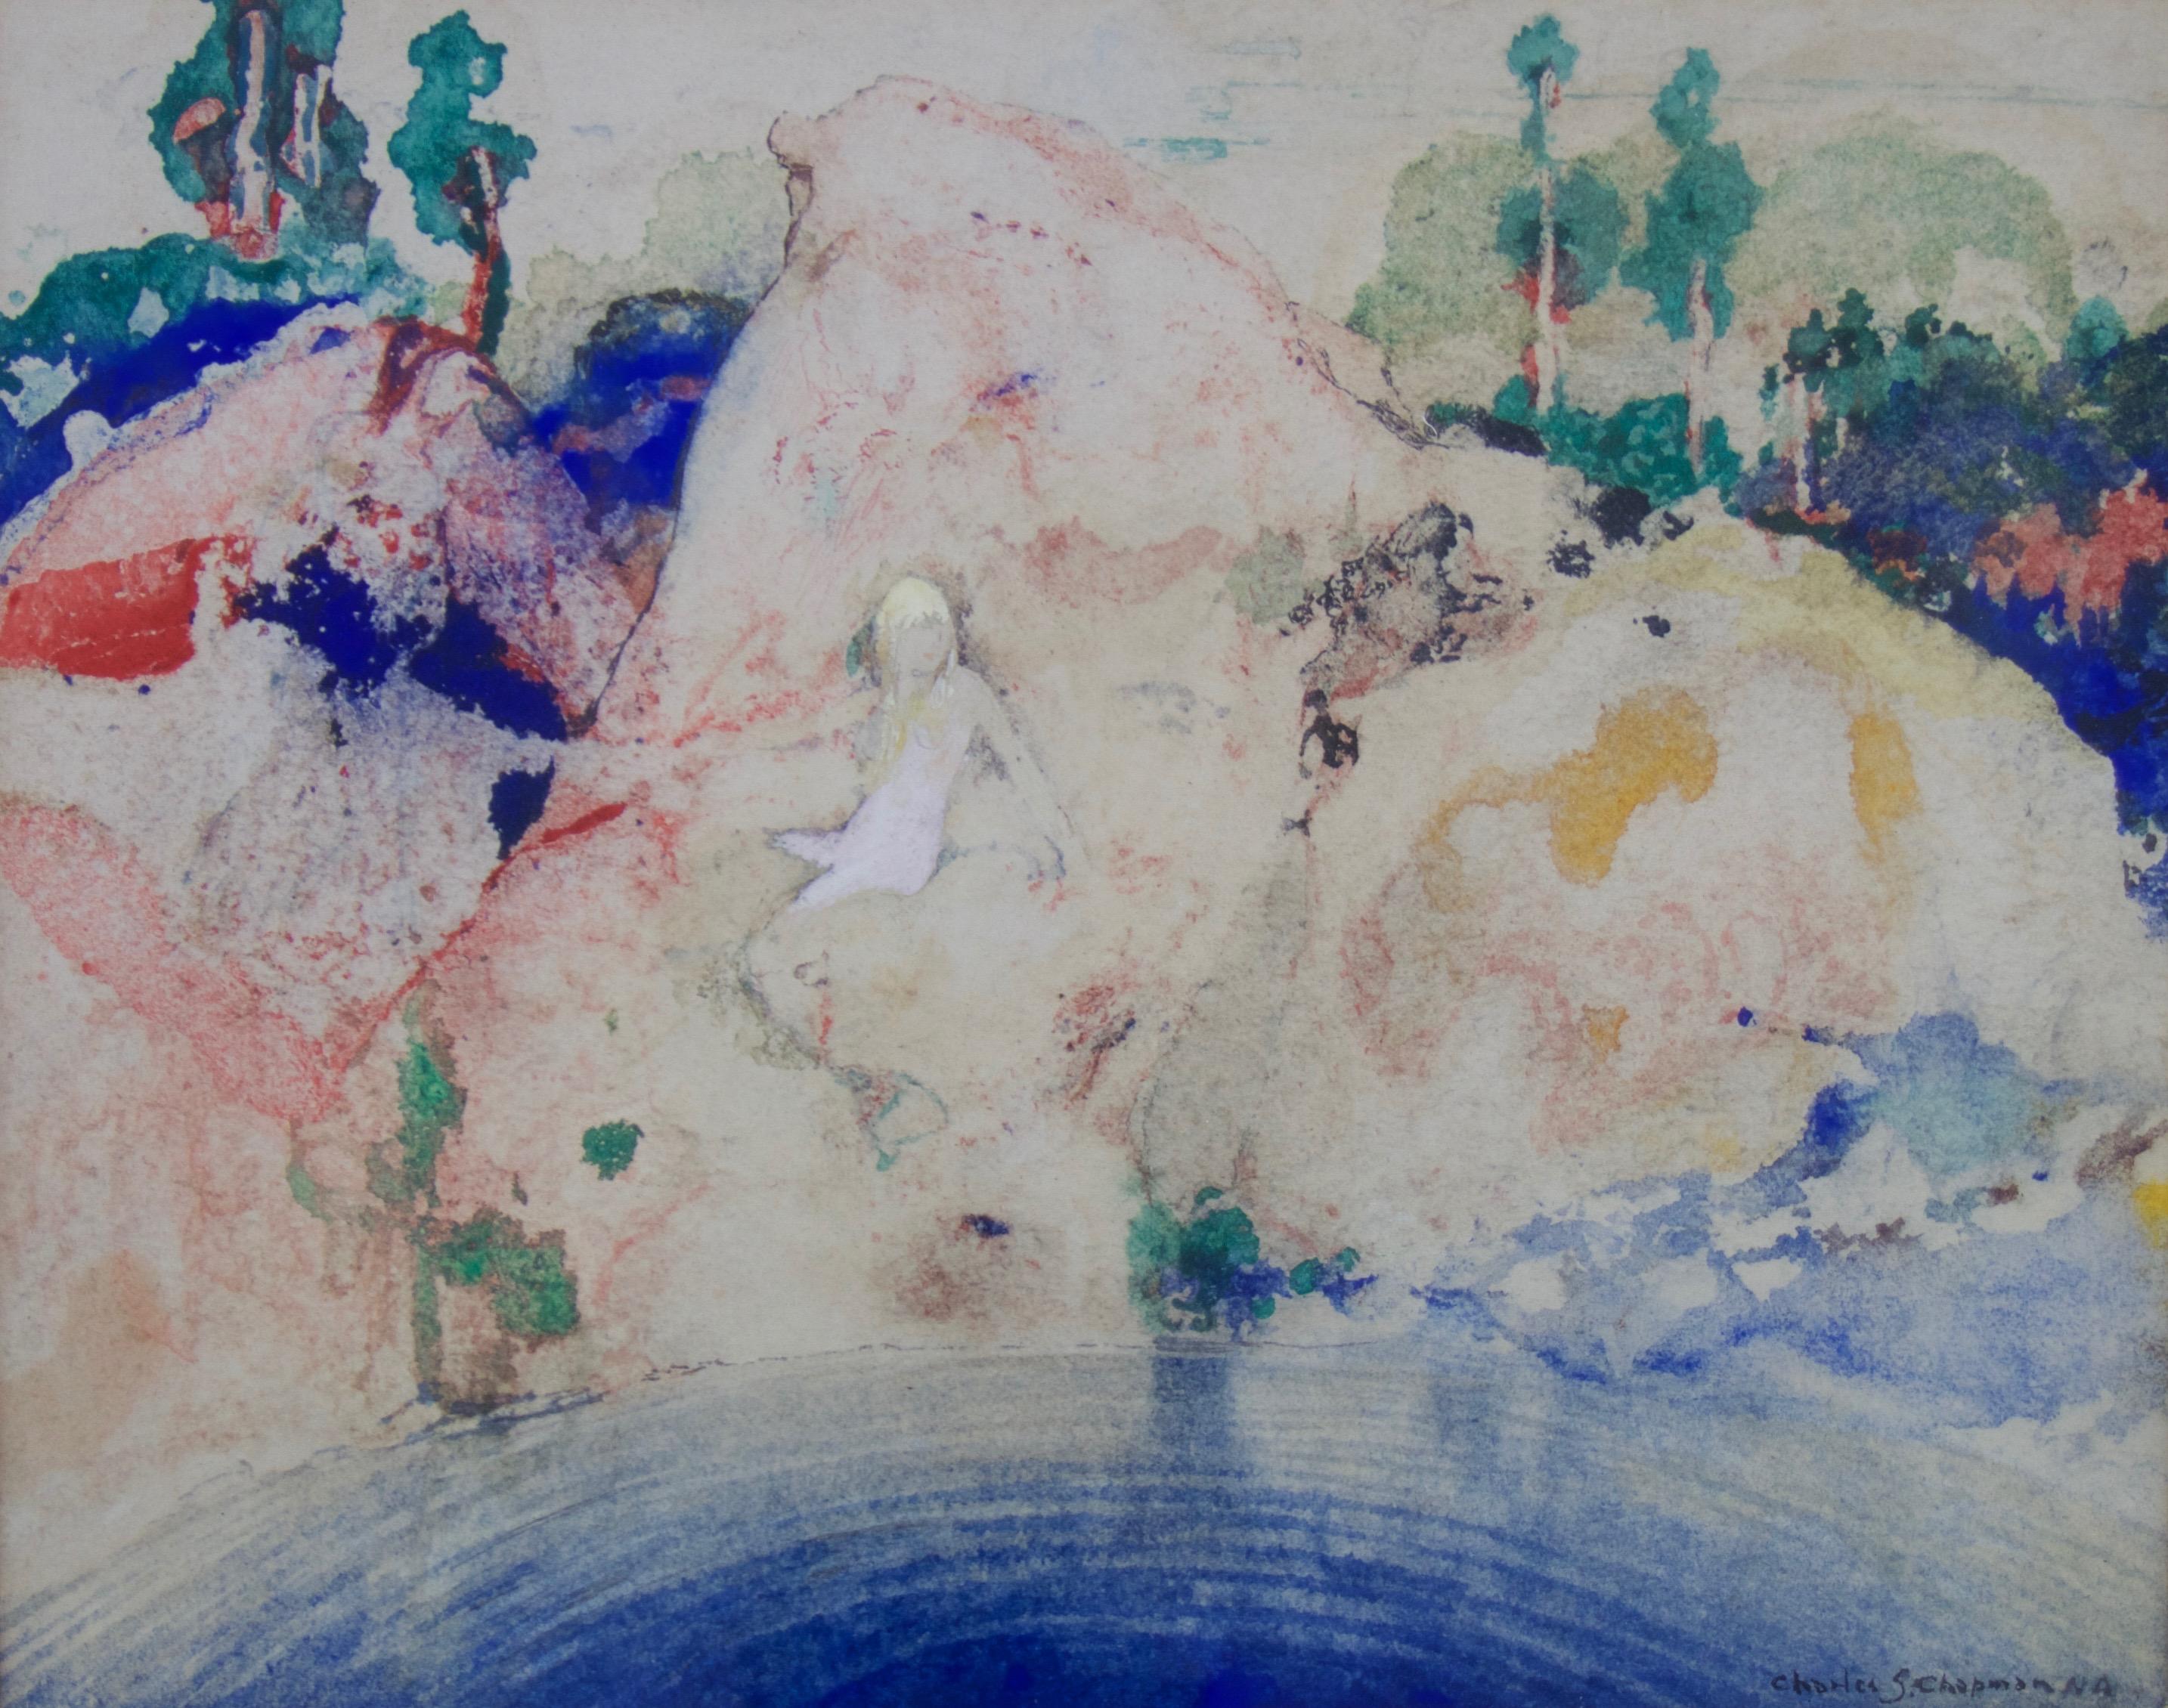 Early American abstract painting by New York artist Charles Chapman depicting a mermaid by a pool of water.   This modernist watercolor is housed in a good period frame and bears an exhibition label from Grand Central Modern Gallery in New York